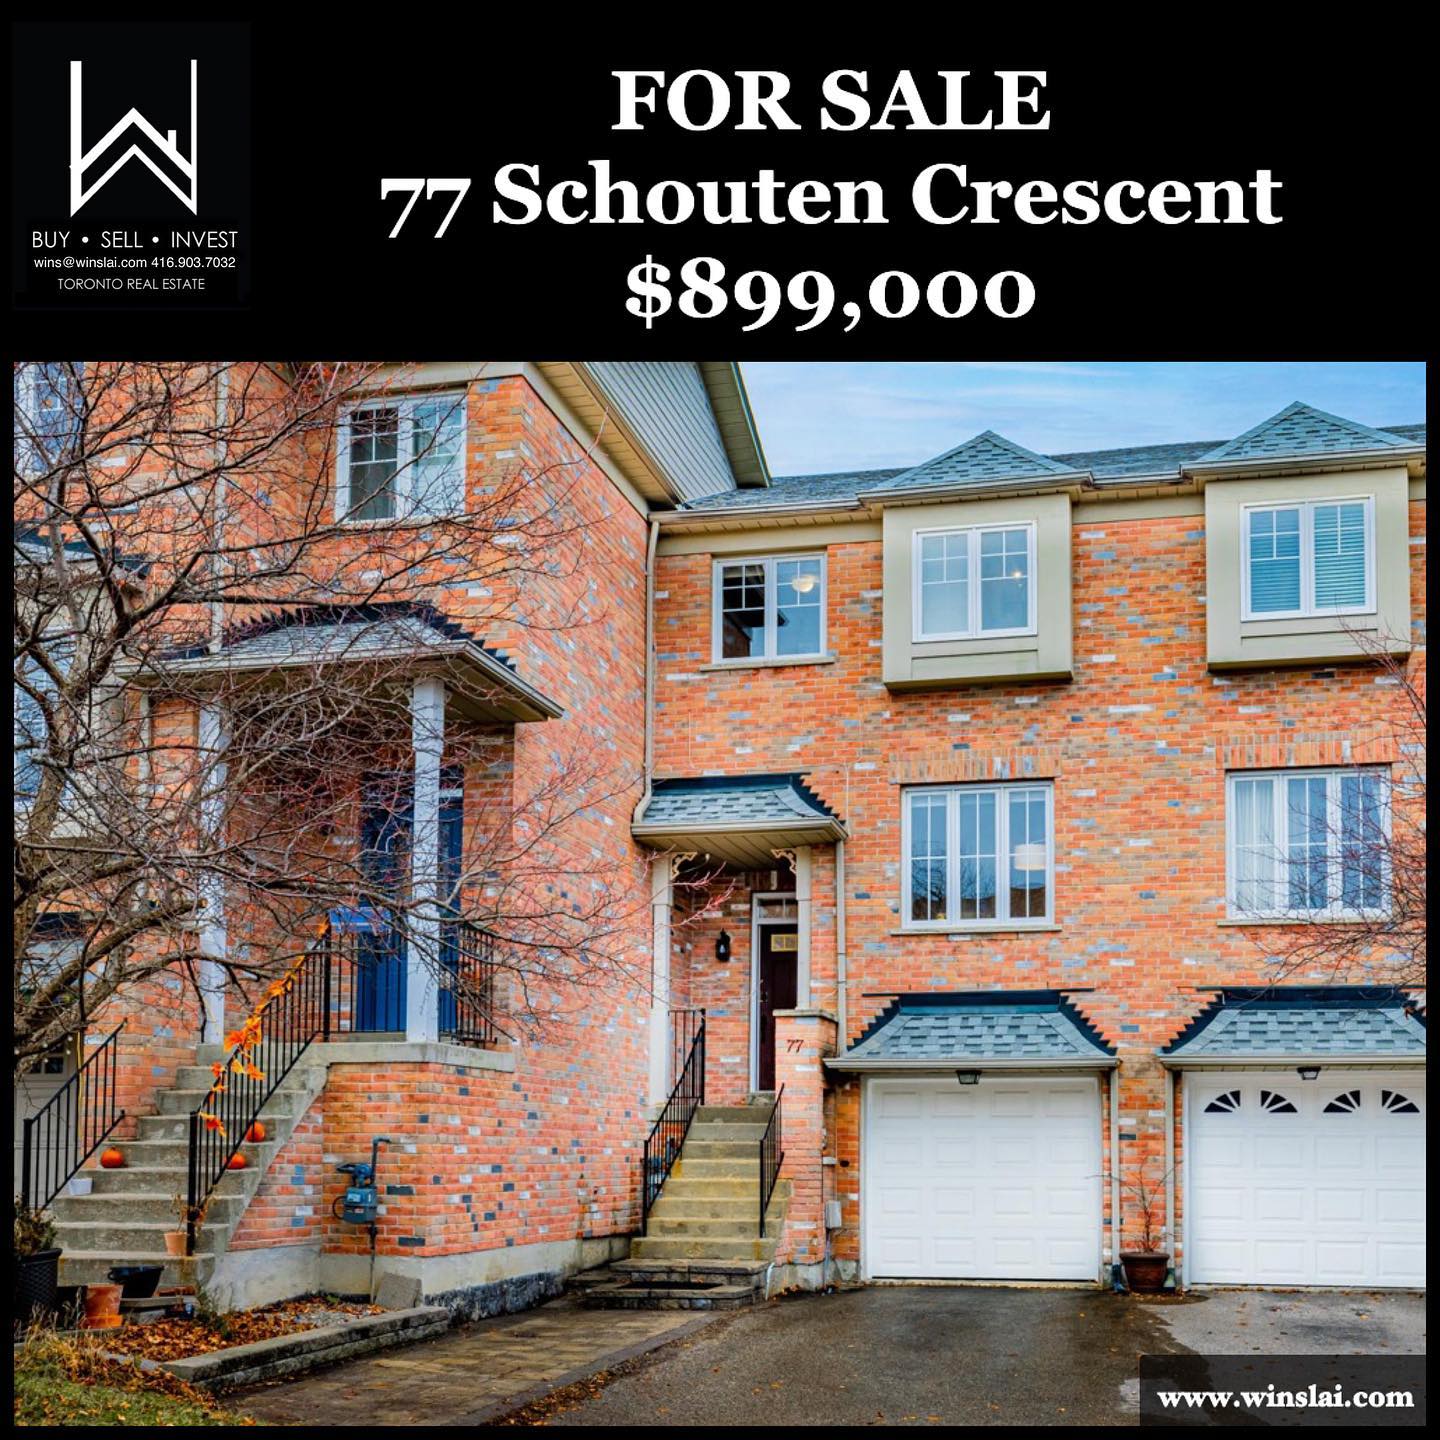 For sale flyer for 77 Schouten Cres showing desire for homes in 2023. 